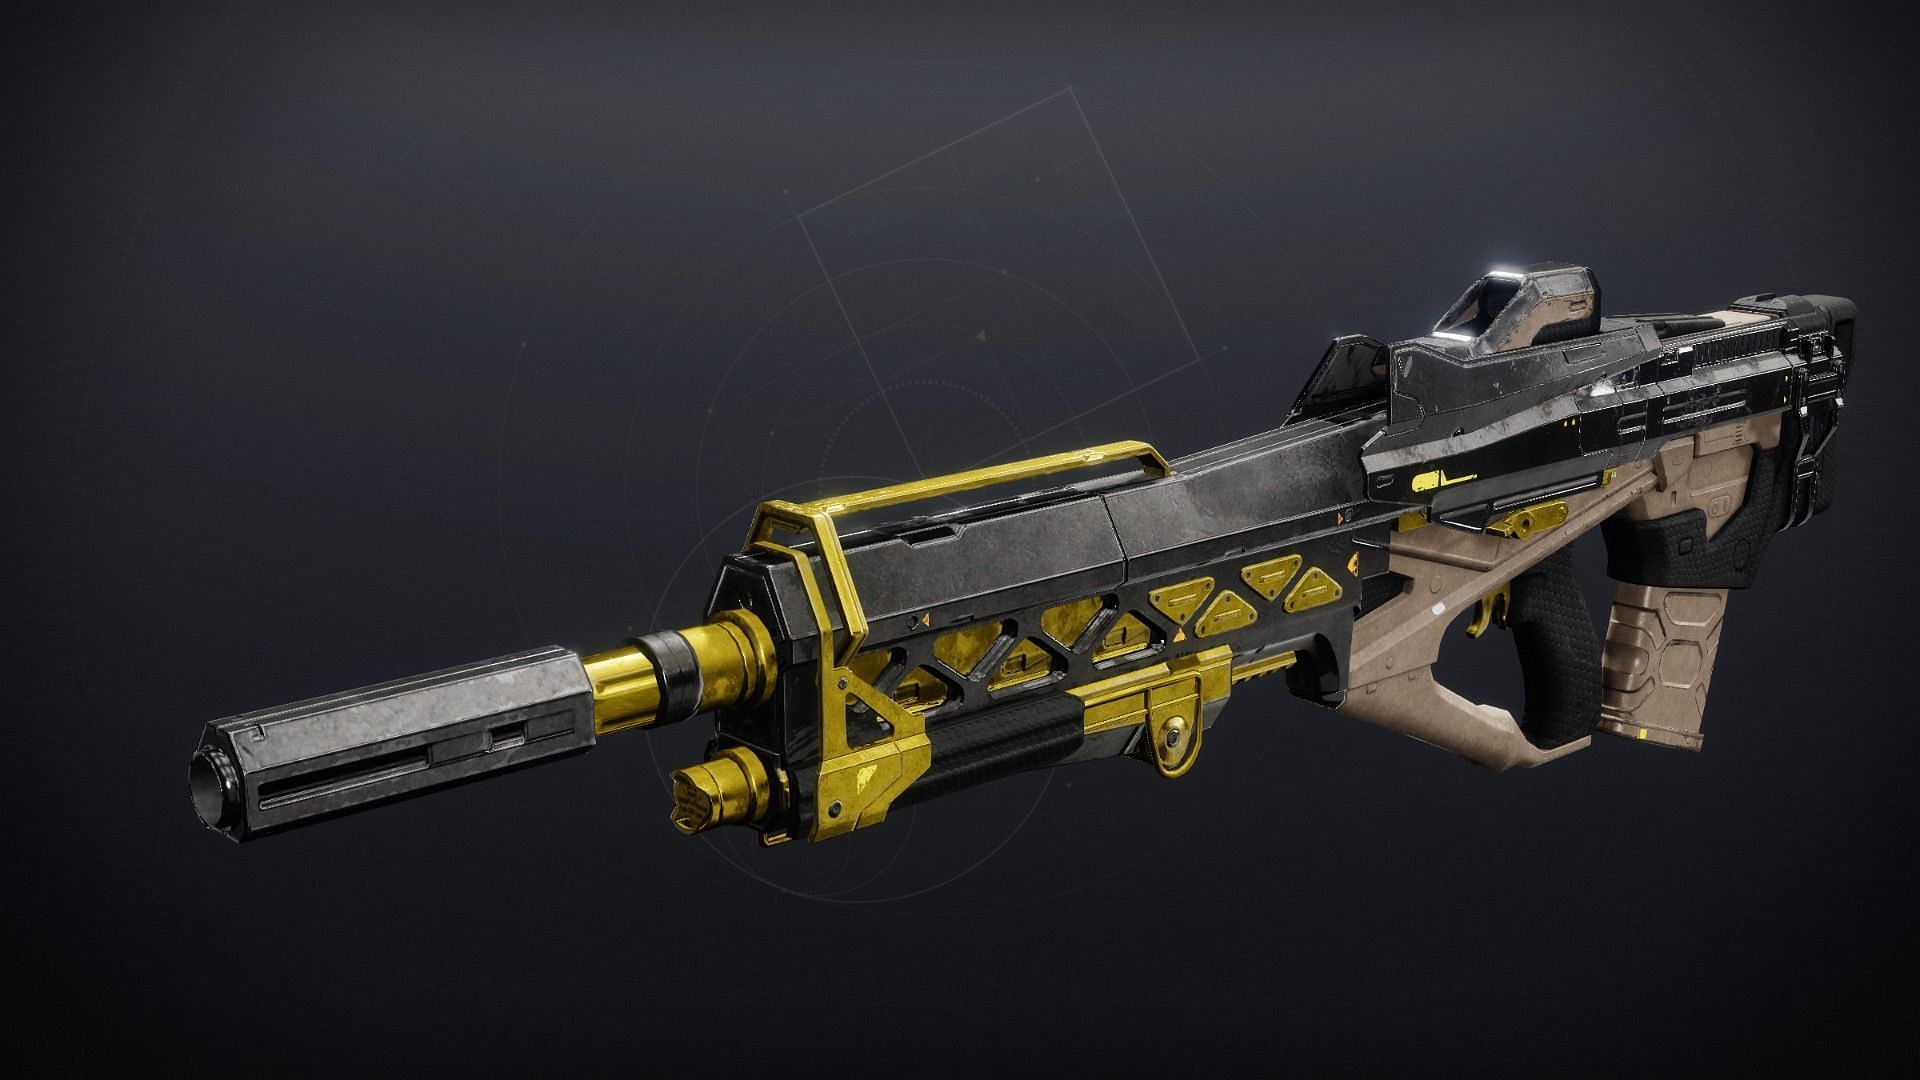 The Psi Hermetic V is a Stasis pulse rifle (Image via Bungie)